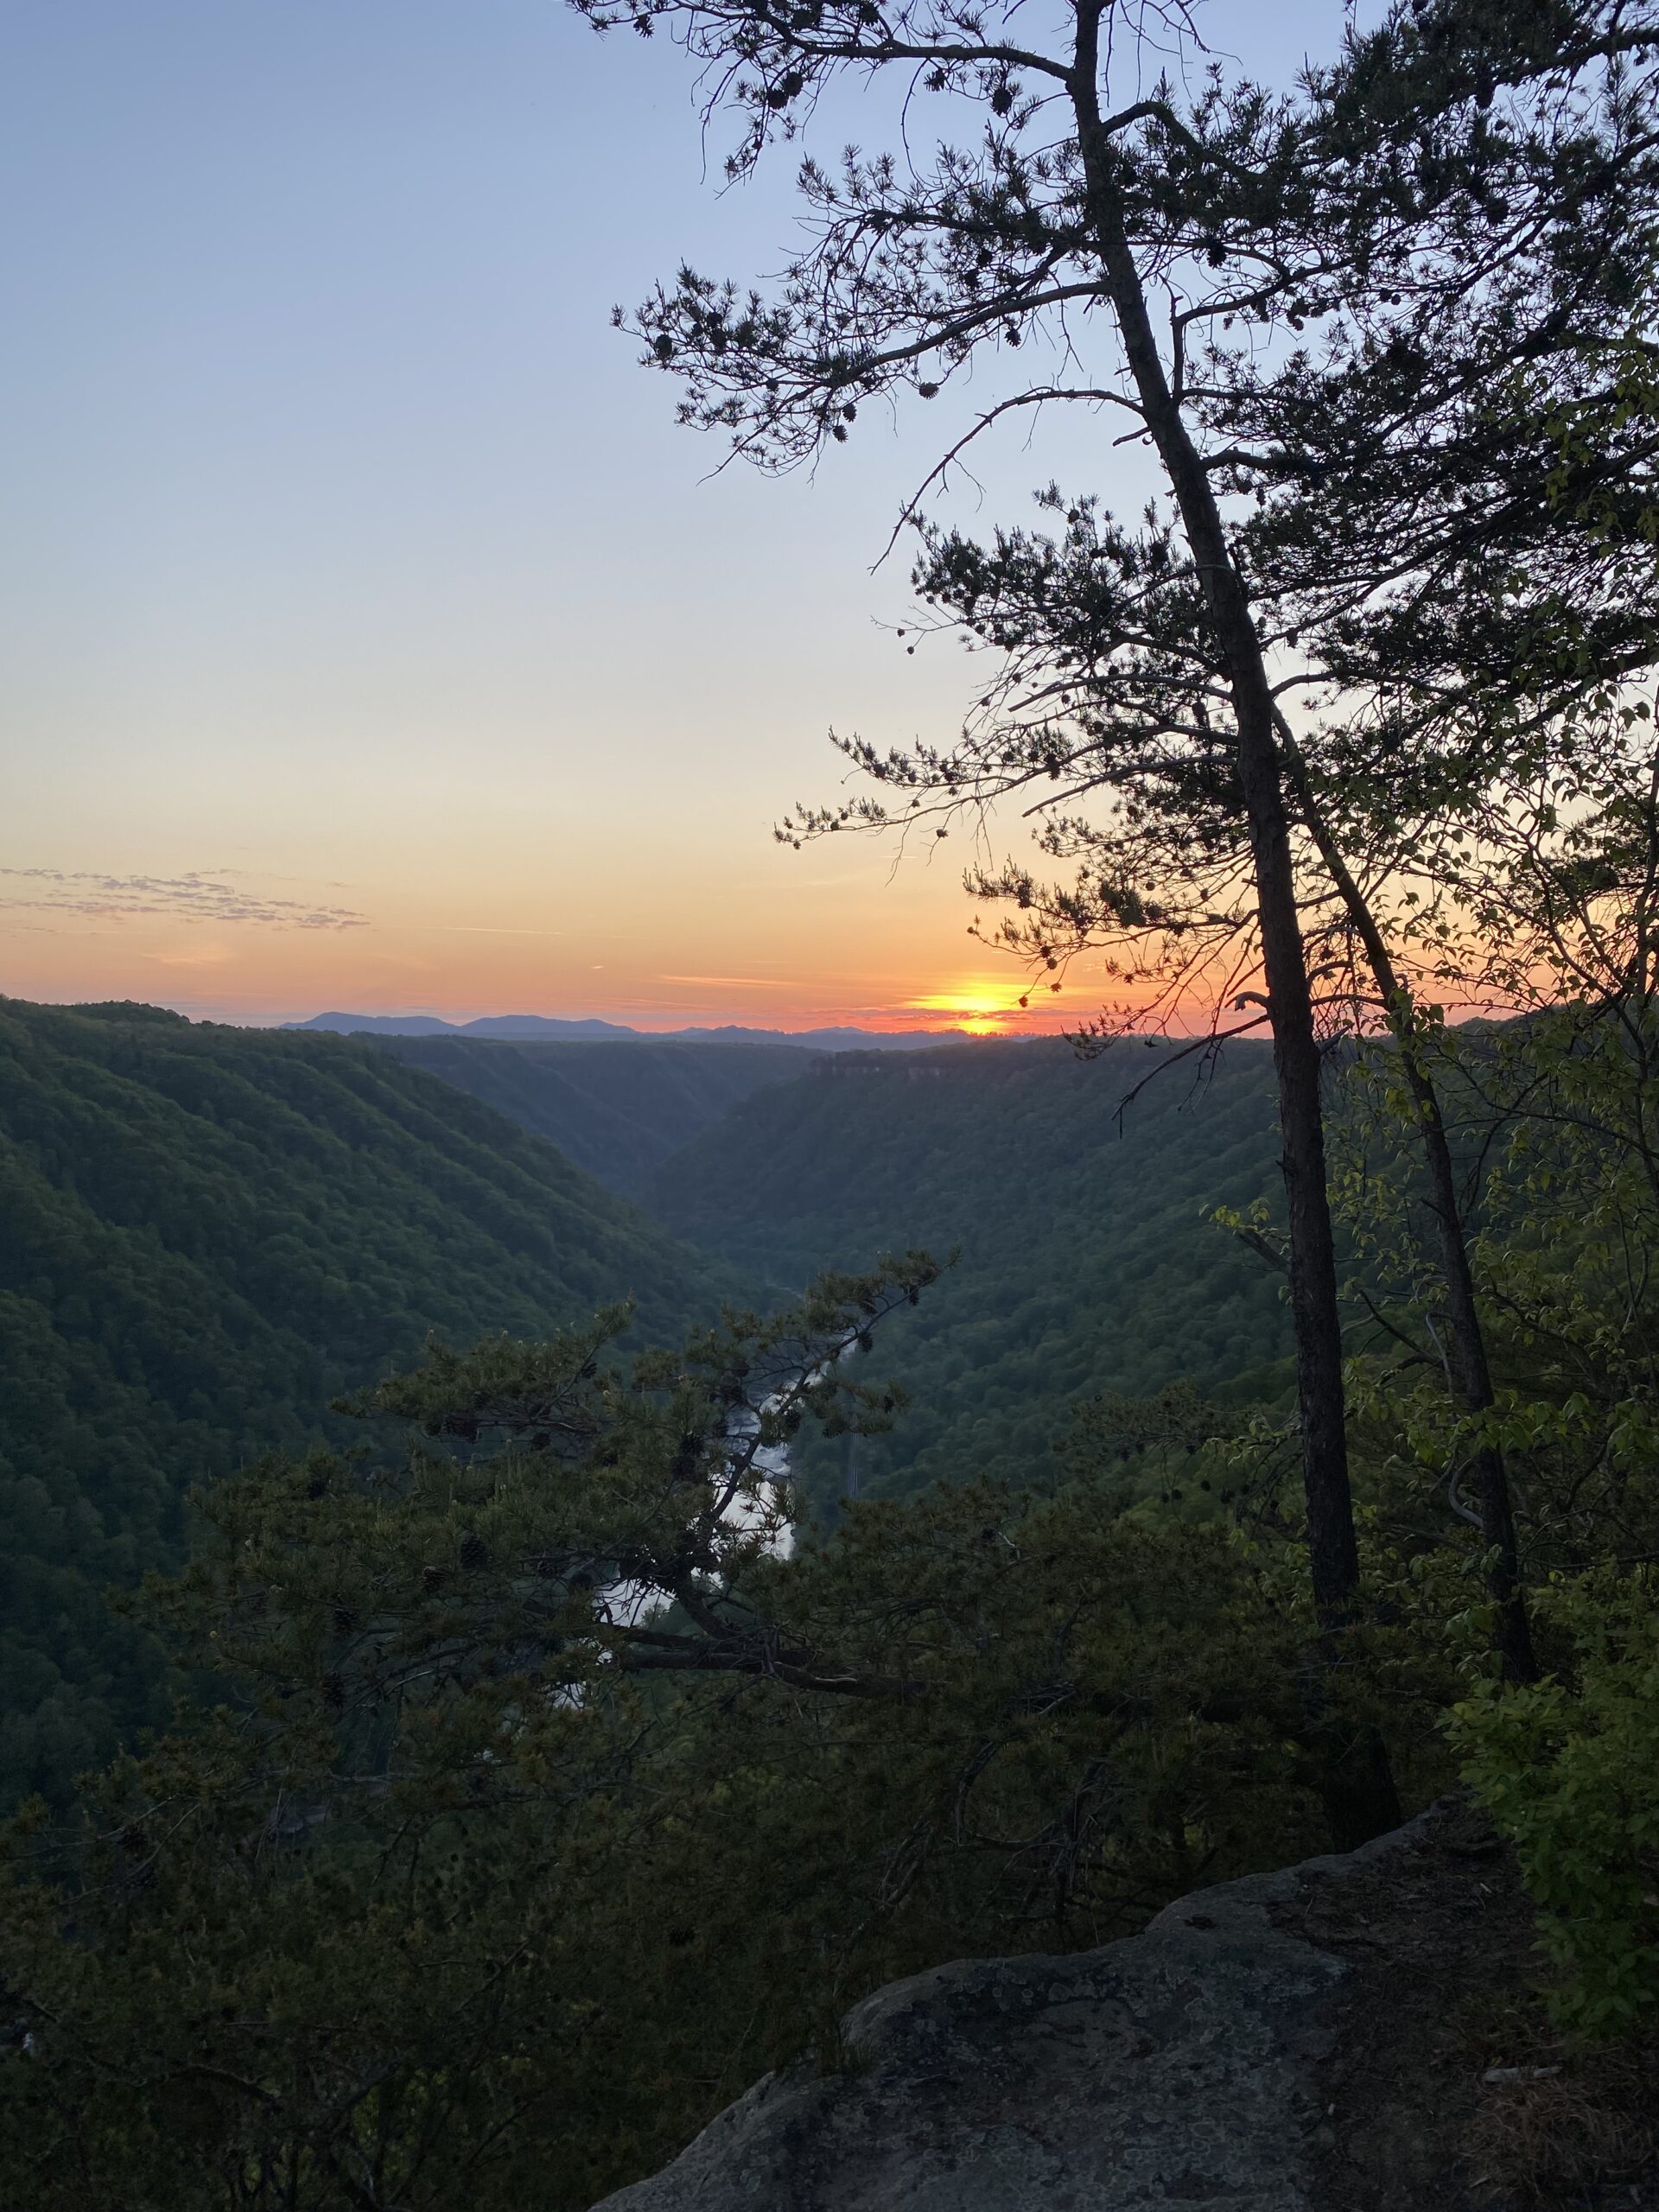 Top 8 Spots To Catch A New River Gorge Sunset - New River Gorge CVB